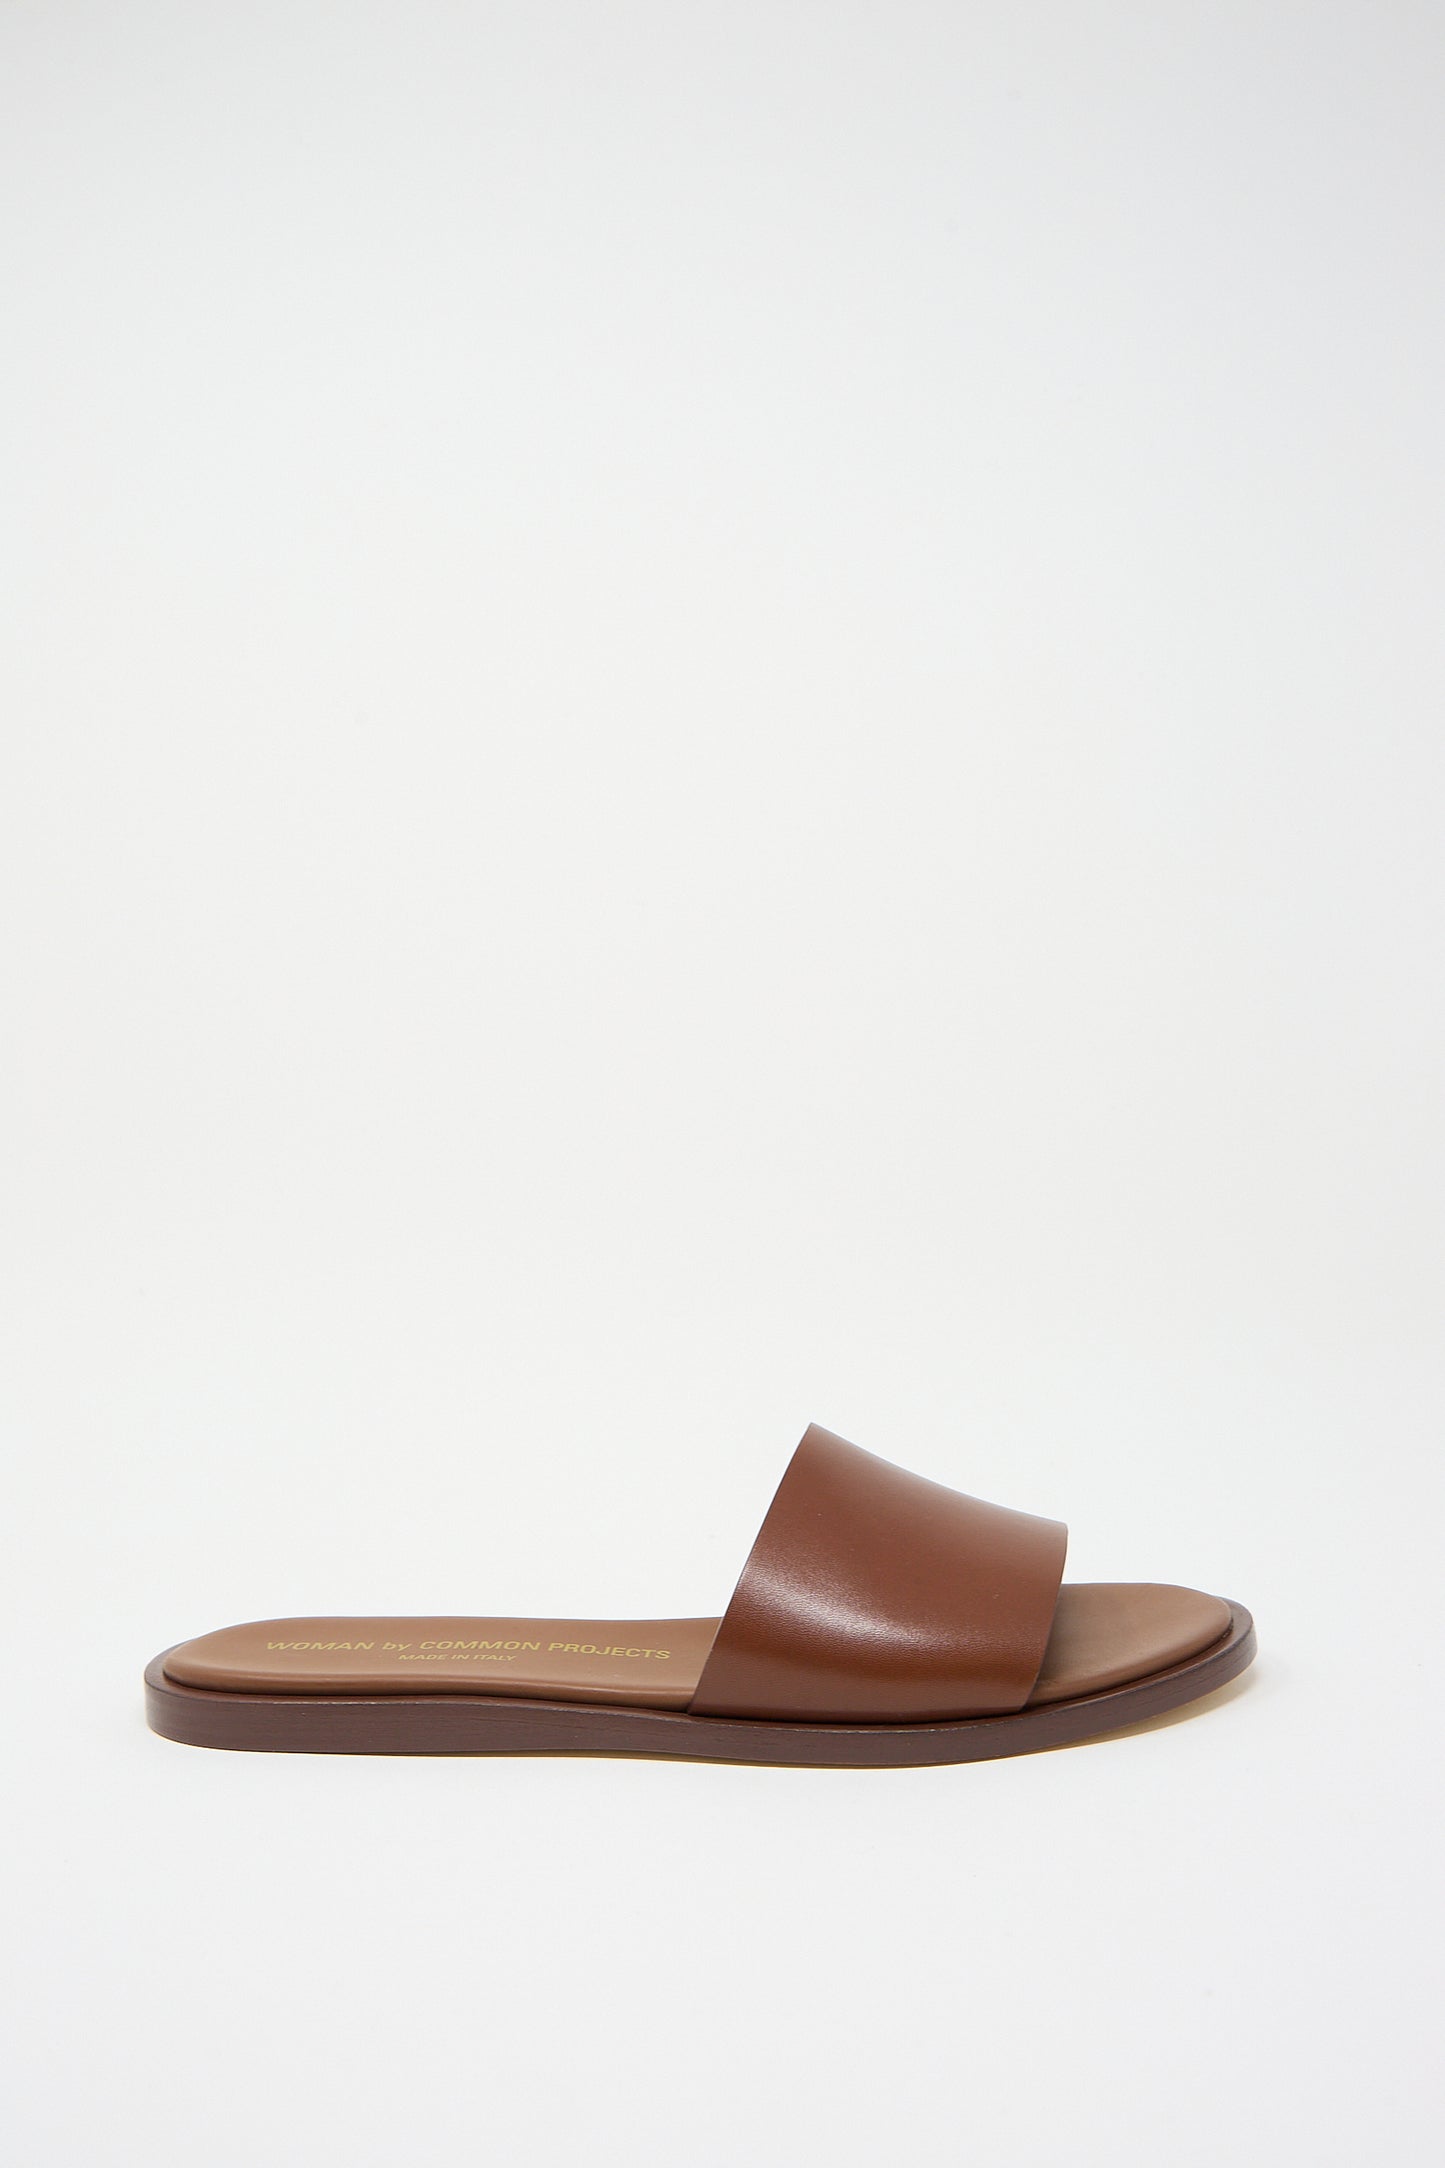 Brown Nappa Leather Slide Sandal by Common Projects on a white background.